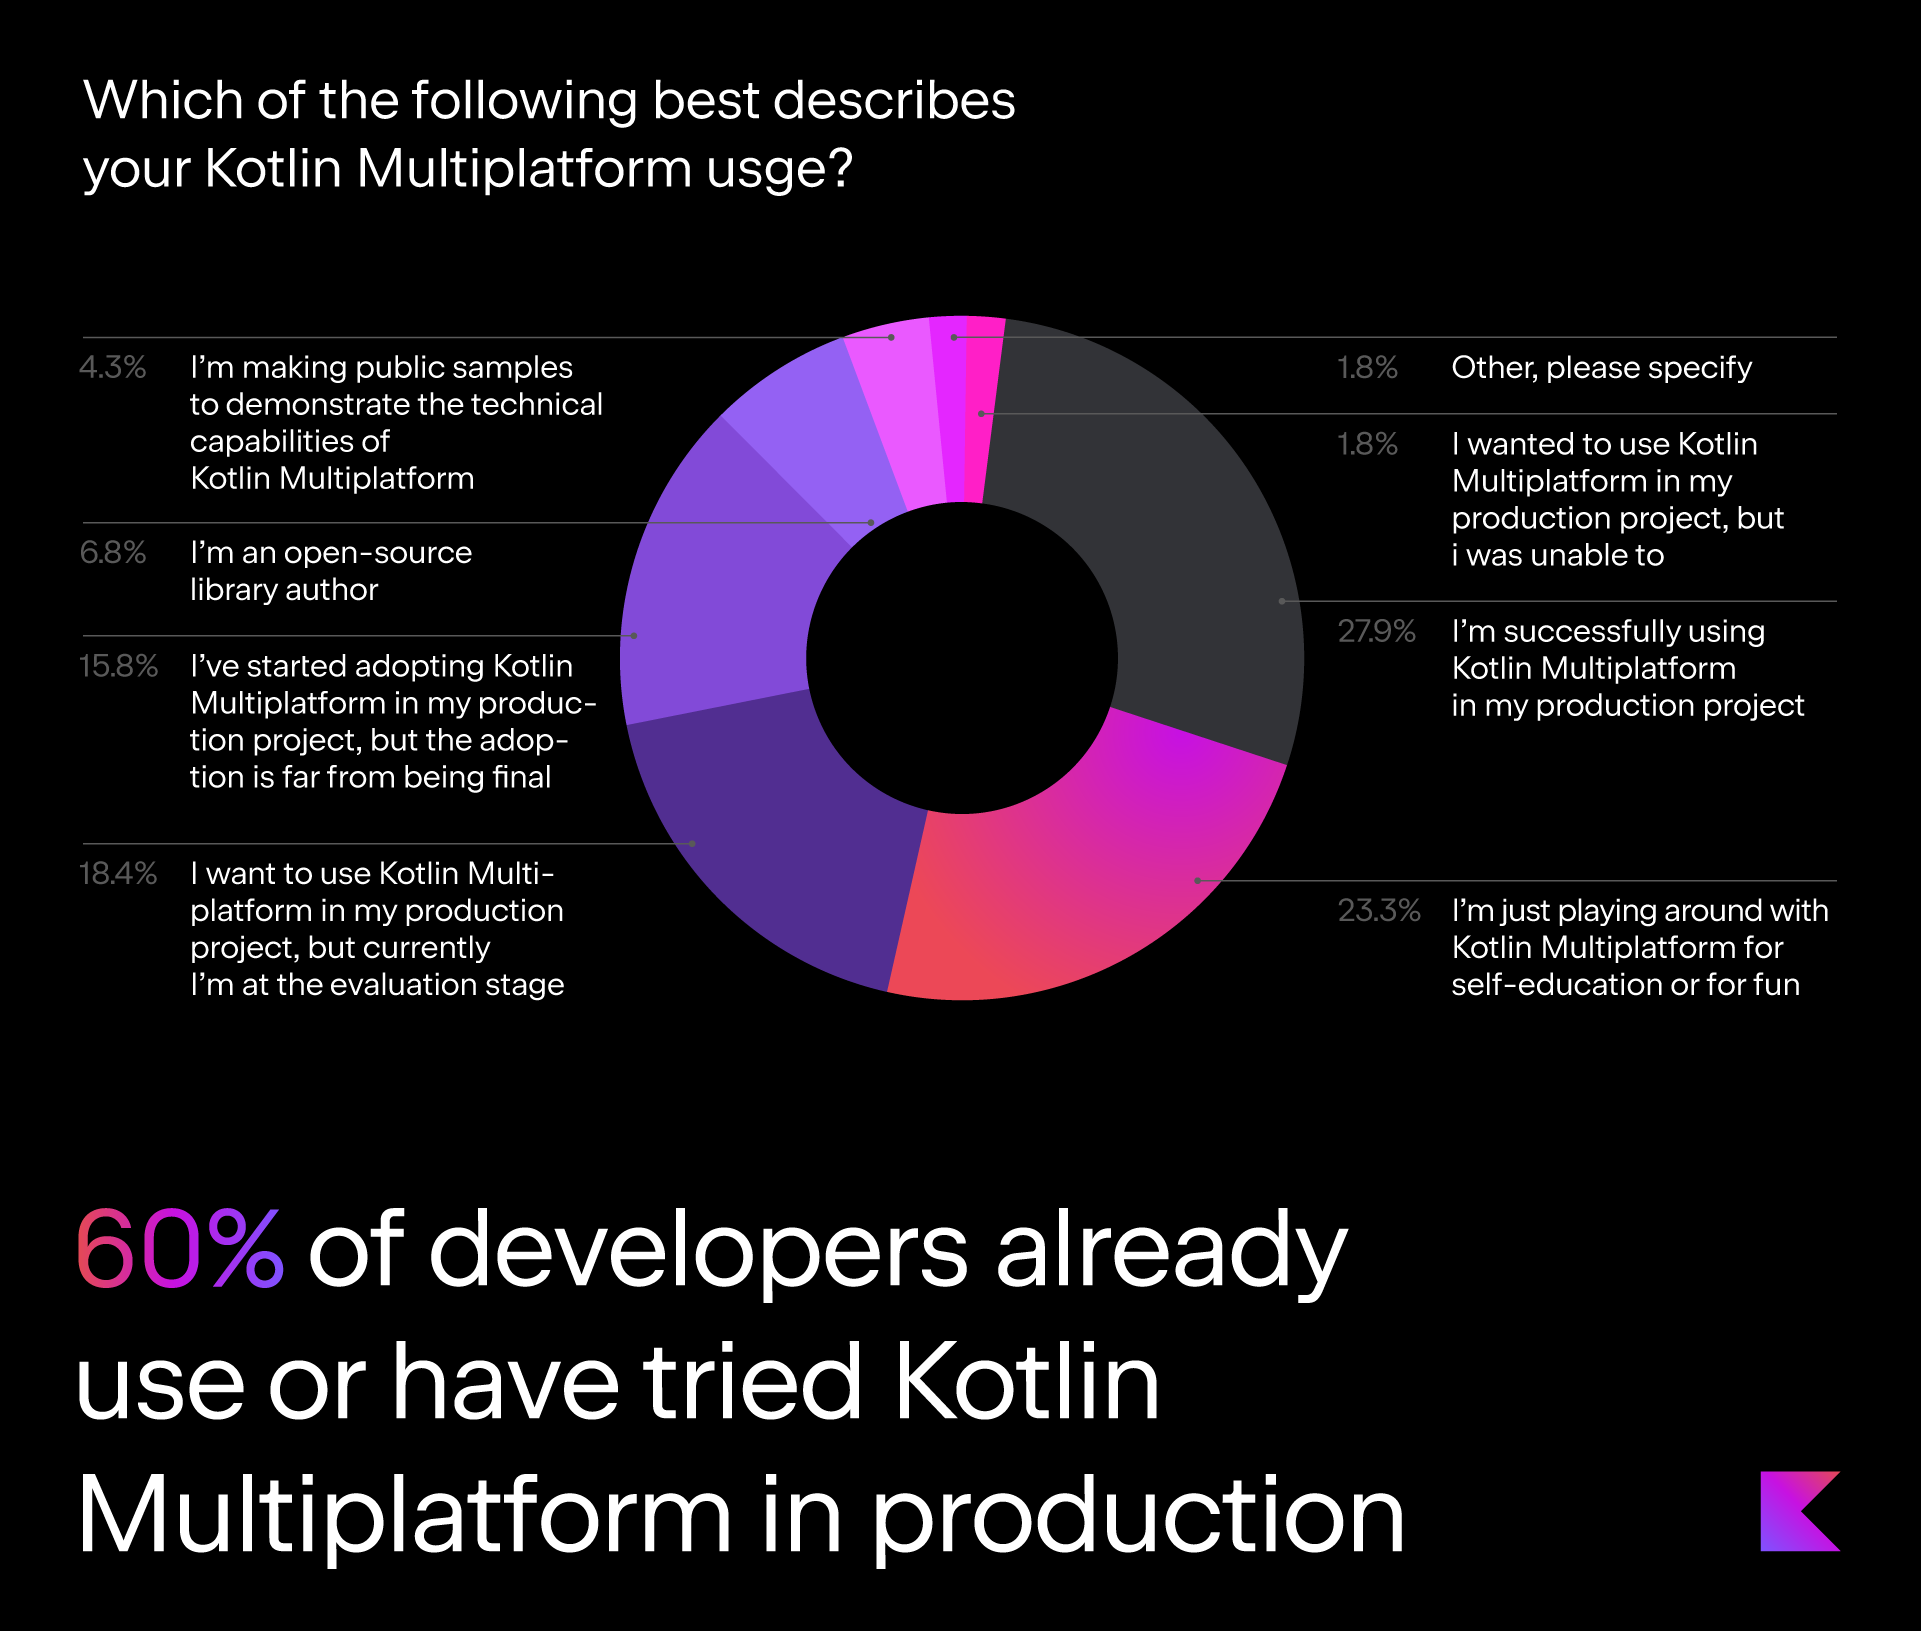 60% of developers already use or have tried Kotlin Multiplatform in production